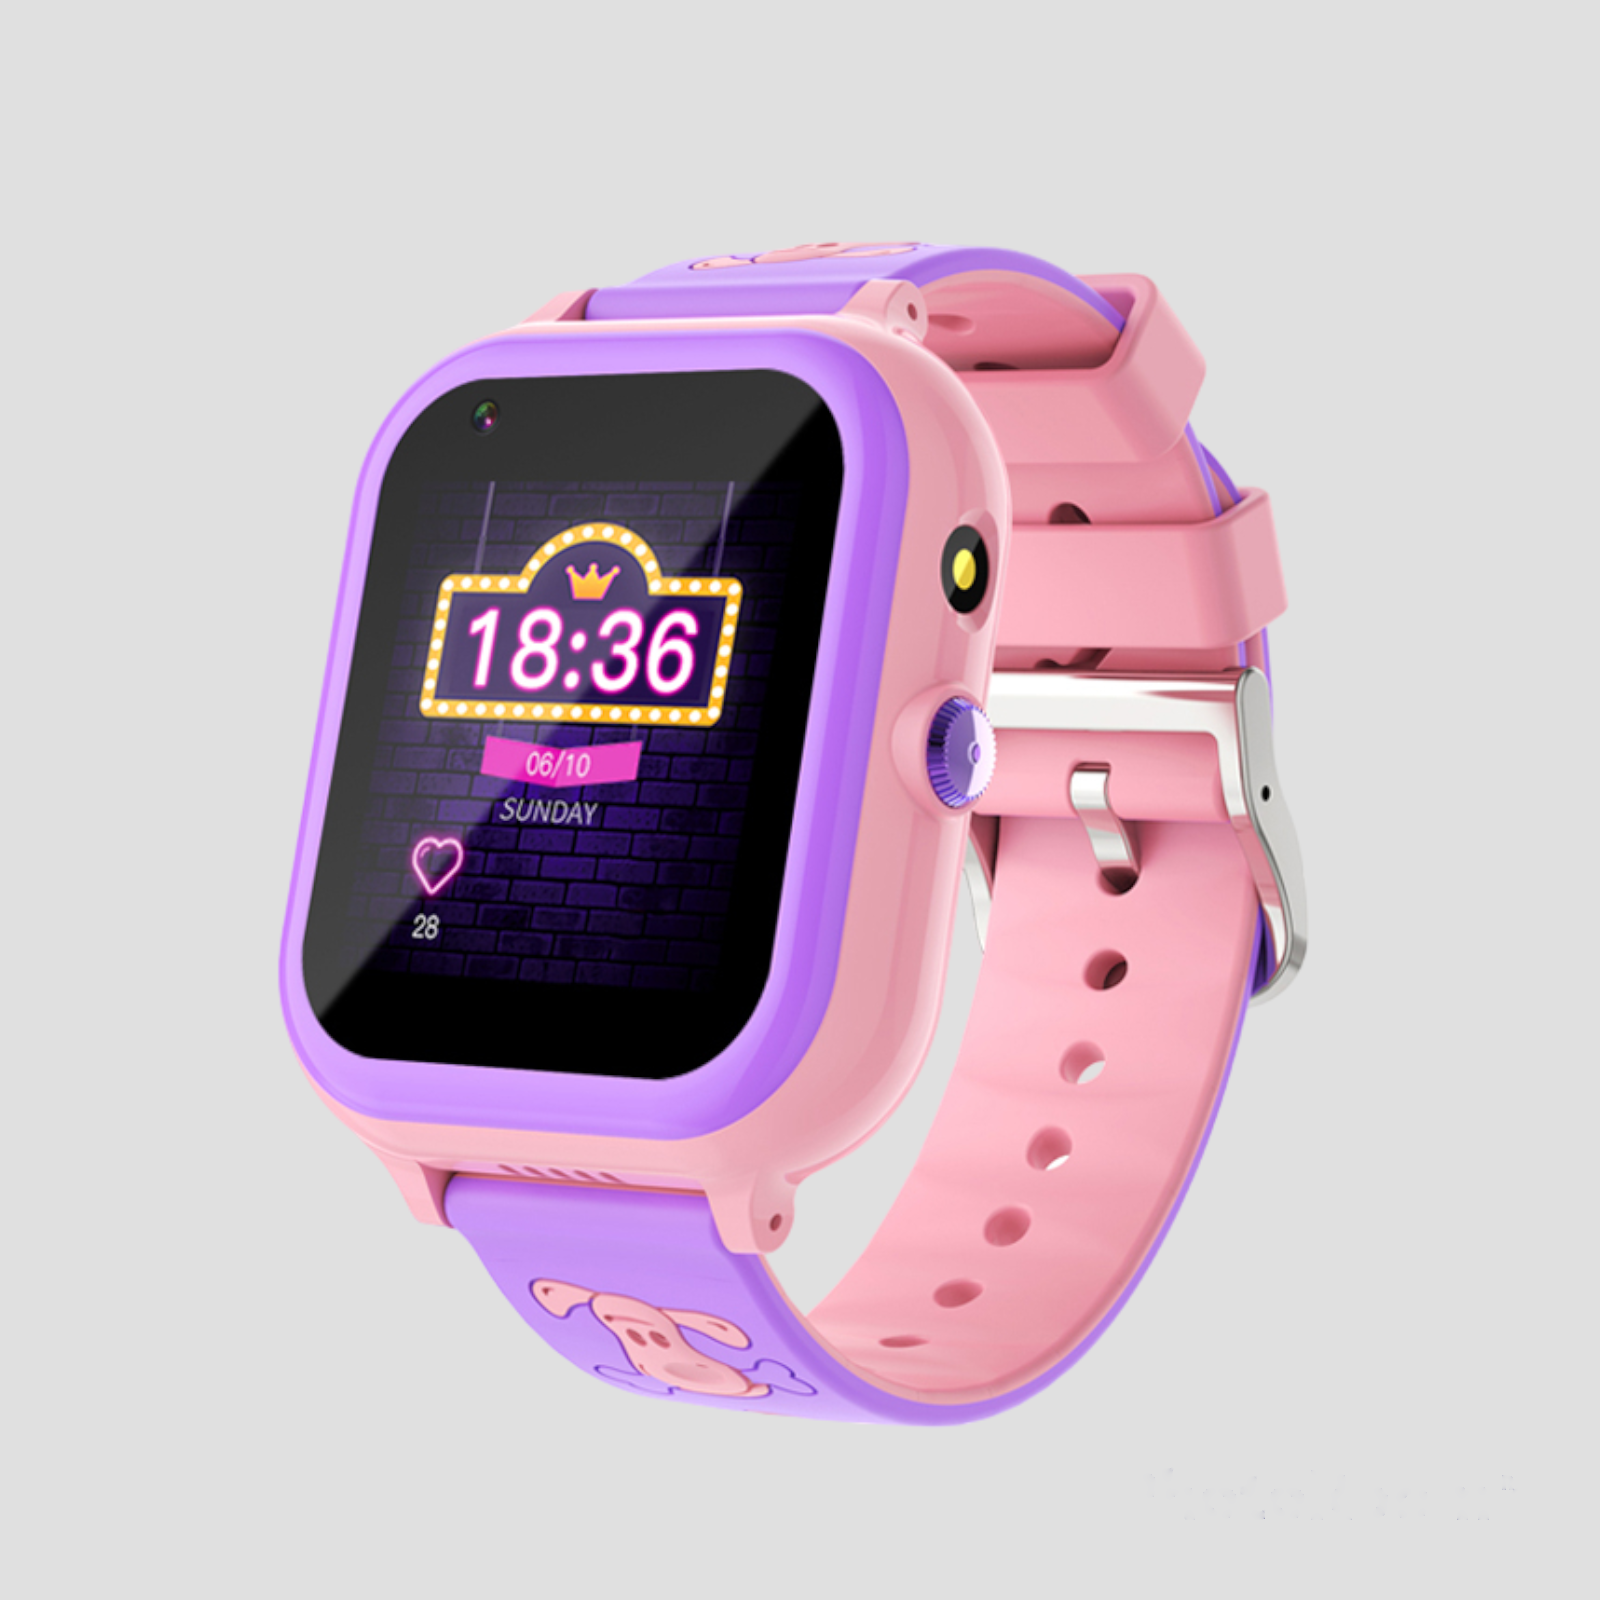 shop pink baby watch for kids in Nepal-Brothermart